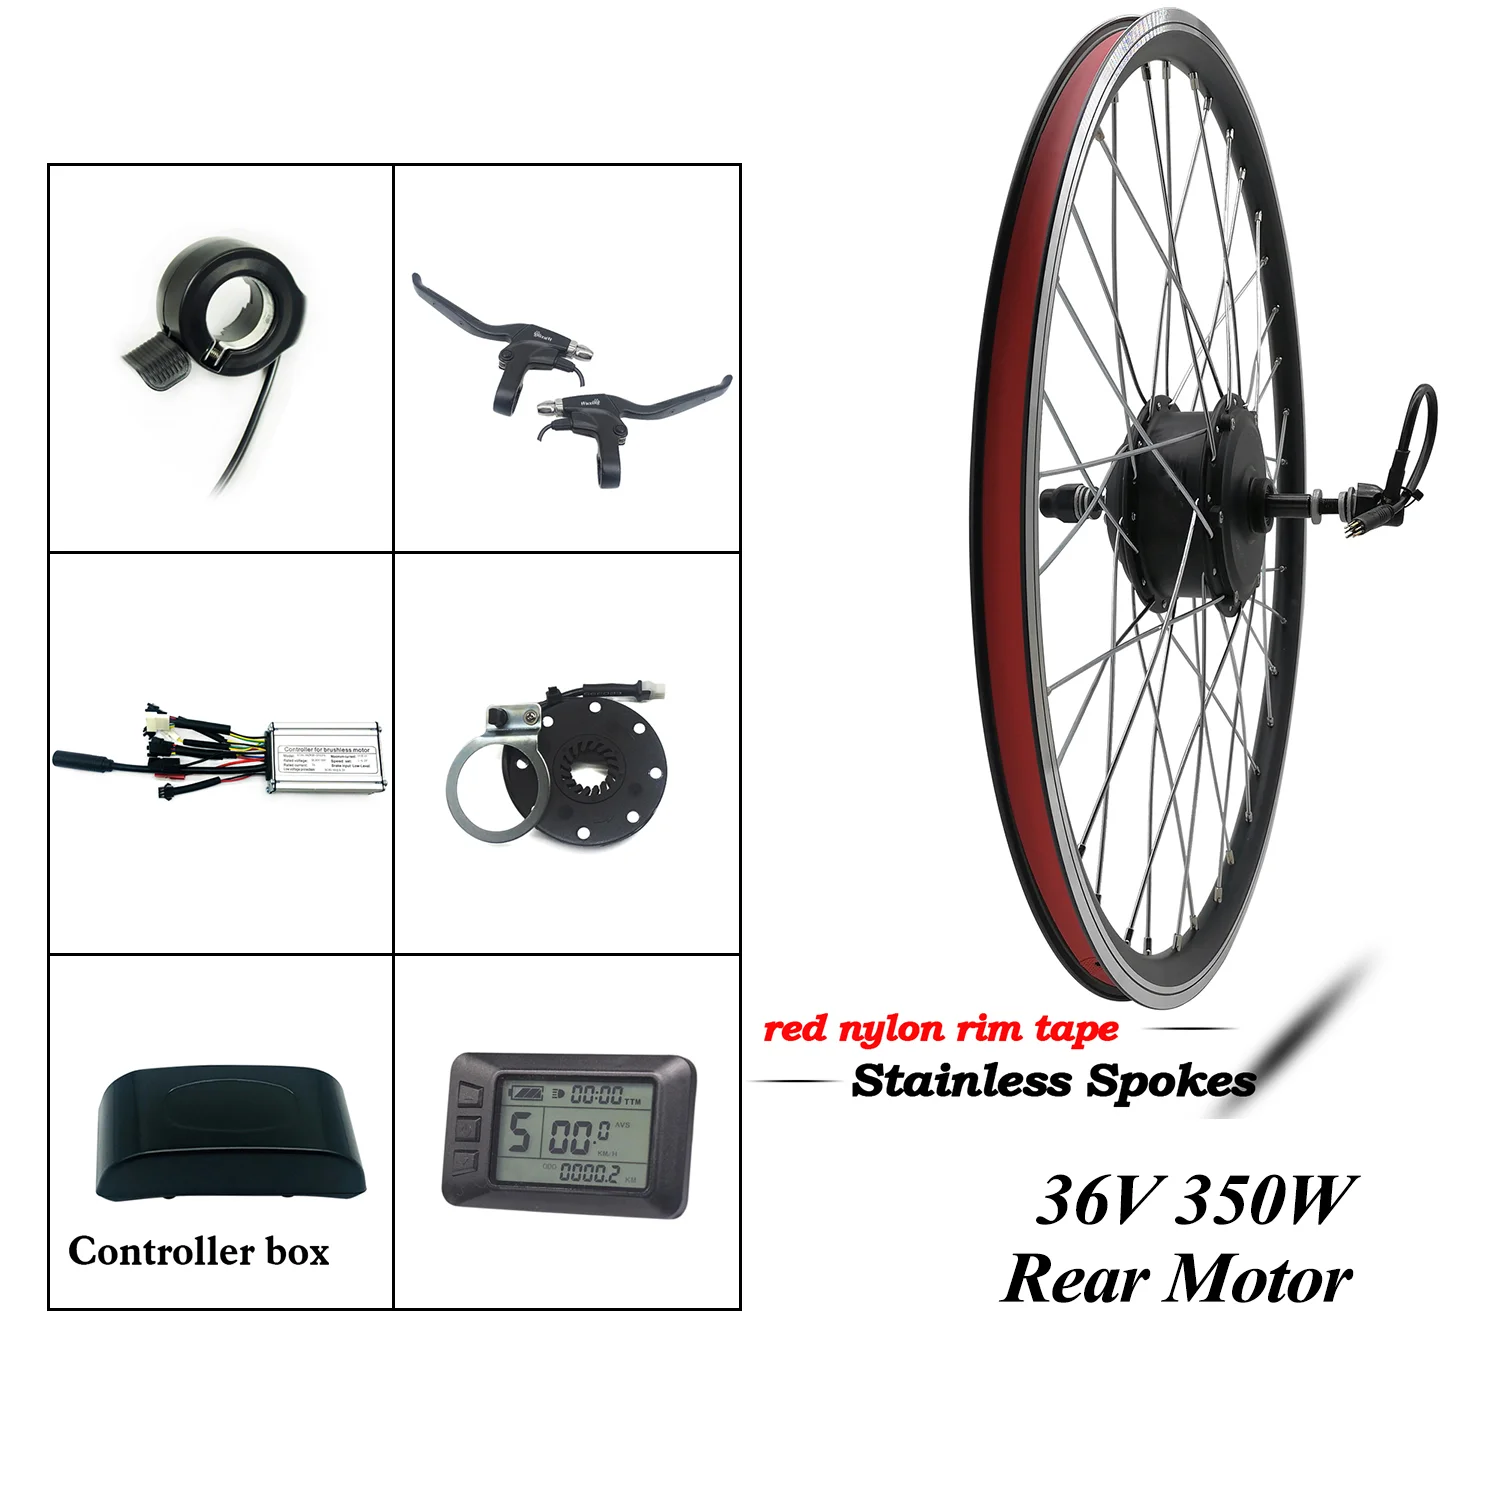 

Greenpedel good quality 36v 350w 26 inch geared hub motor electric bicycle conversion kit for bike